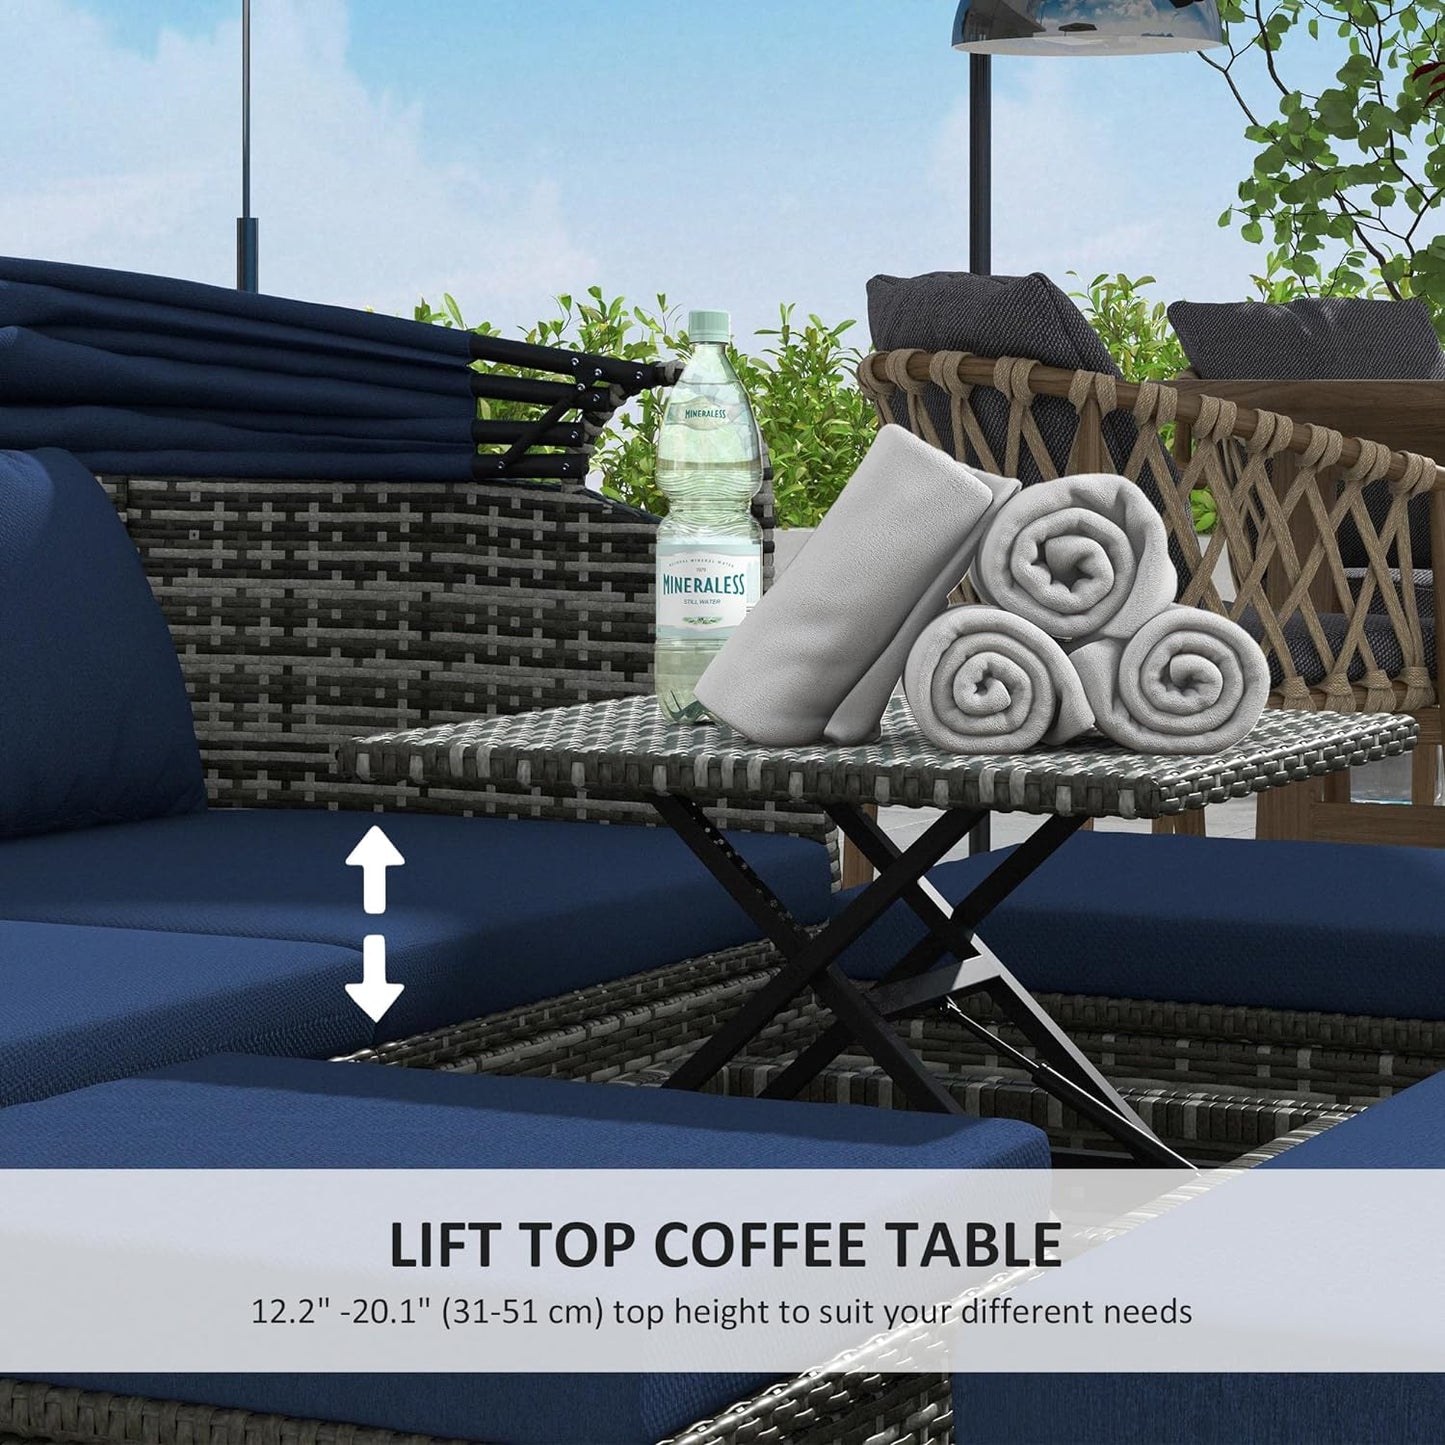 6 Pieces PE Rattan Patio Furniture Sets, Outdoor Daybed with Canopy and Lift Top Coffee Table, Sectional Wicker Conversation Sets with Cushions and Pillows, Navy Blue